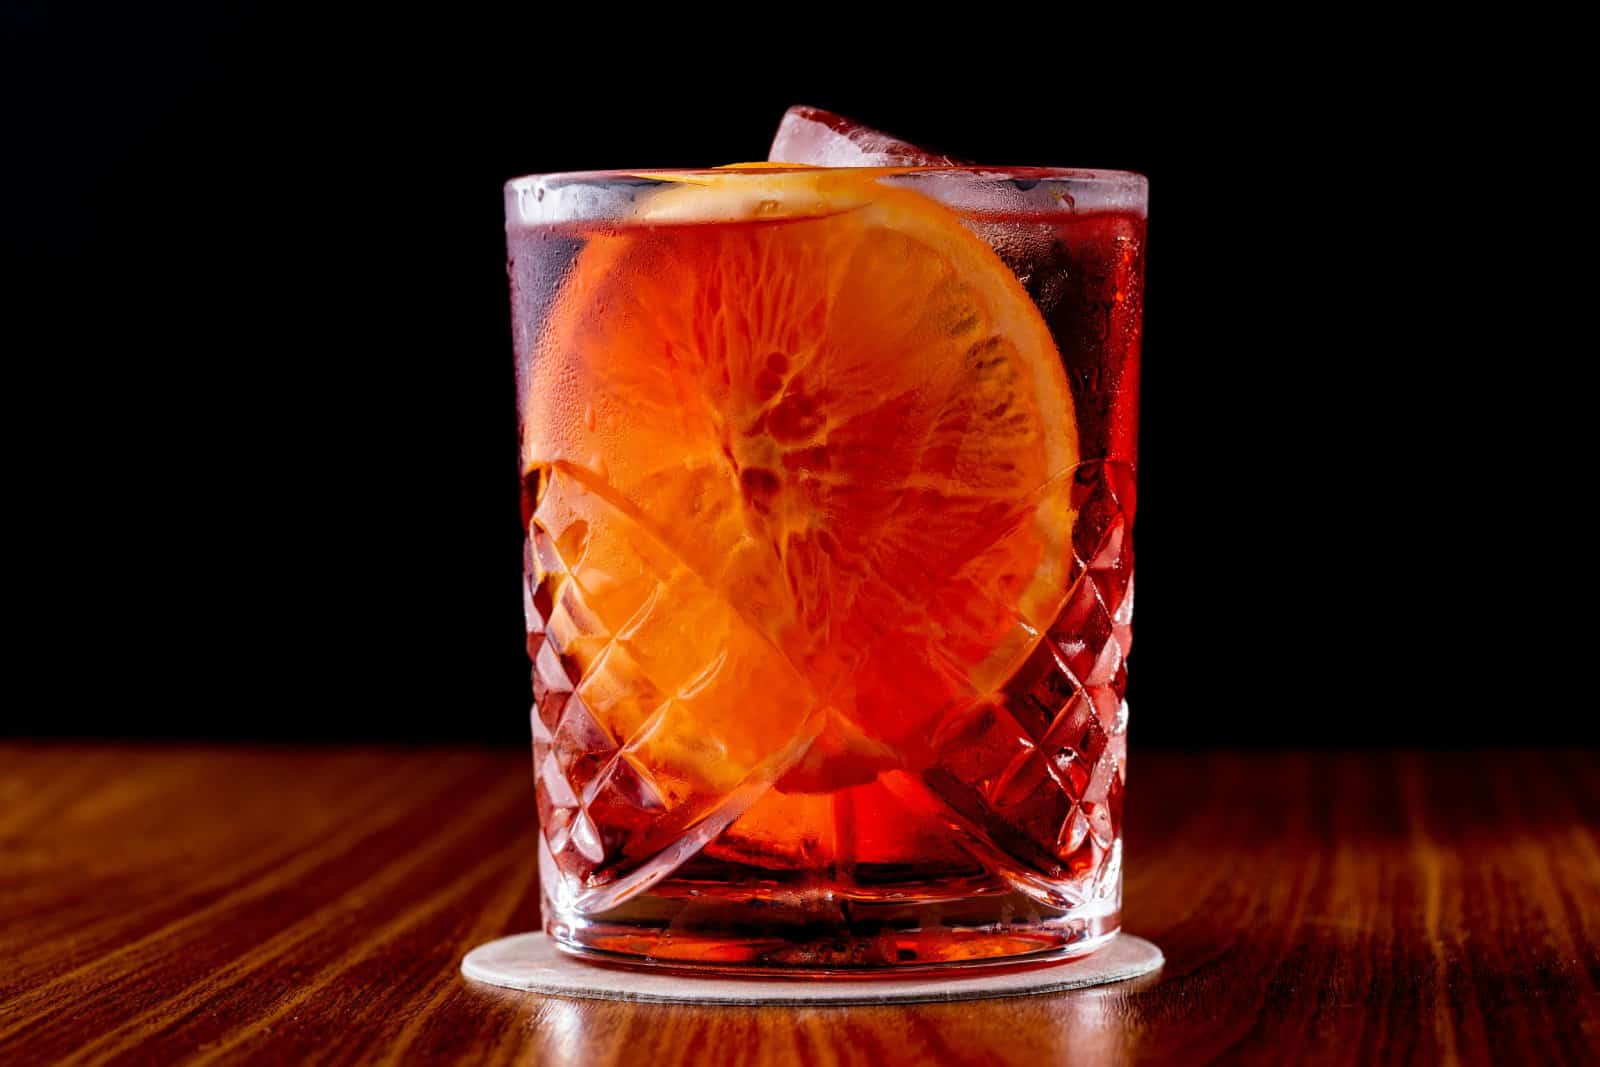 Image Credit: Pexels / Leonardo Luz <p><span>Raise a glass to a day well spent with a classic Negroni, a timeless cocktail that’s as iconic as the city of Florence itself. Made with equal parts gin, Campari, and sweet vermouth, this bittersweet concoction is the perfect way to unwind and toast to the magic of Italy’s culinary heritage. Sample it at a historic bar in Florence’s bustling city center and let the vibrant flavors of Tuscany linger on your palate long into the evening.</span></p>